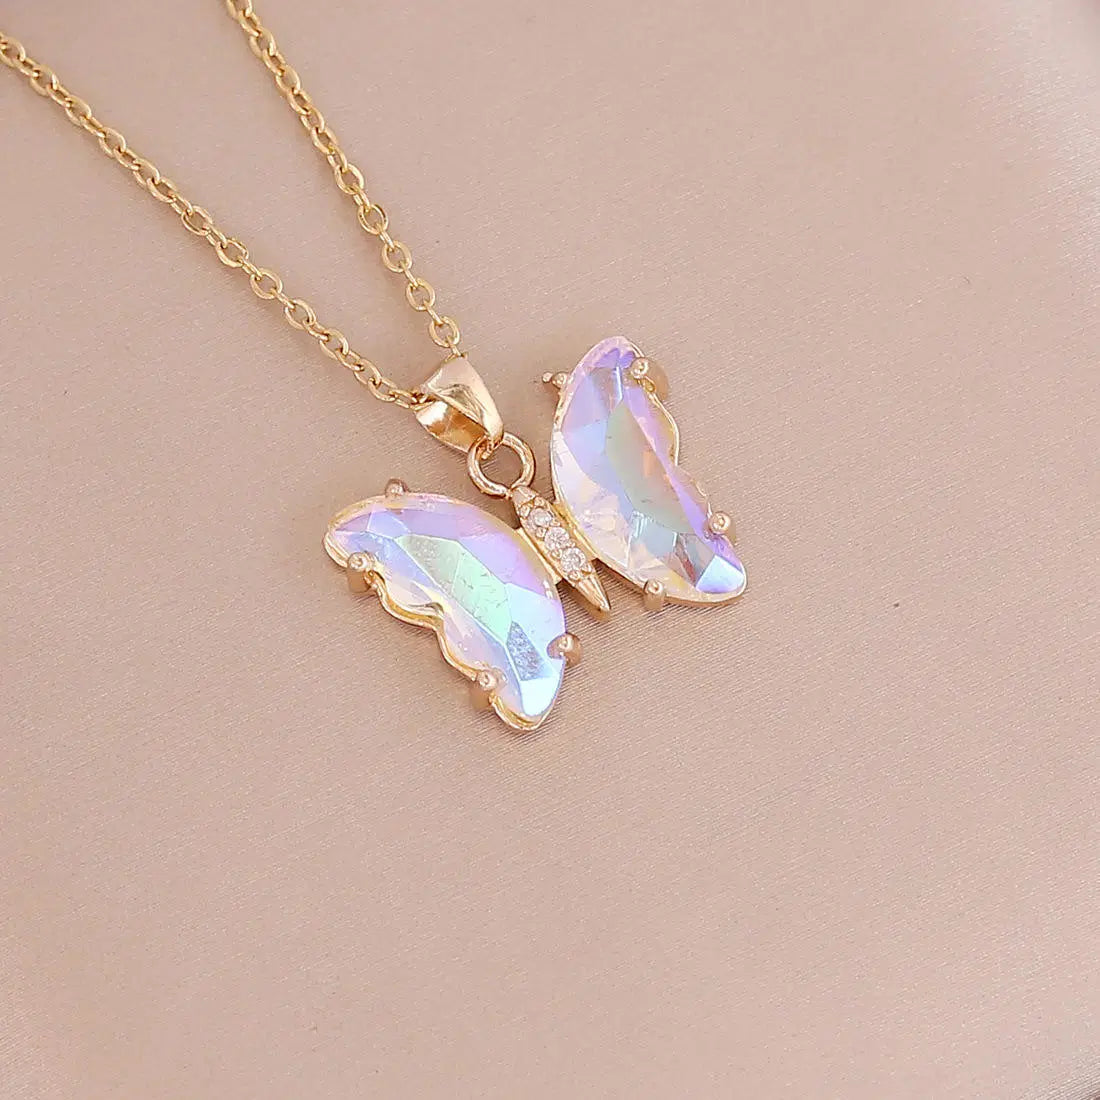 Revamp of Fashionable Personality: Gradient Butterfly Pendant Necklace for Women